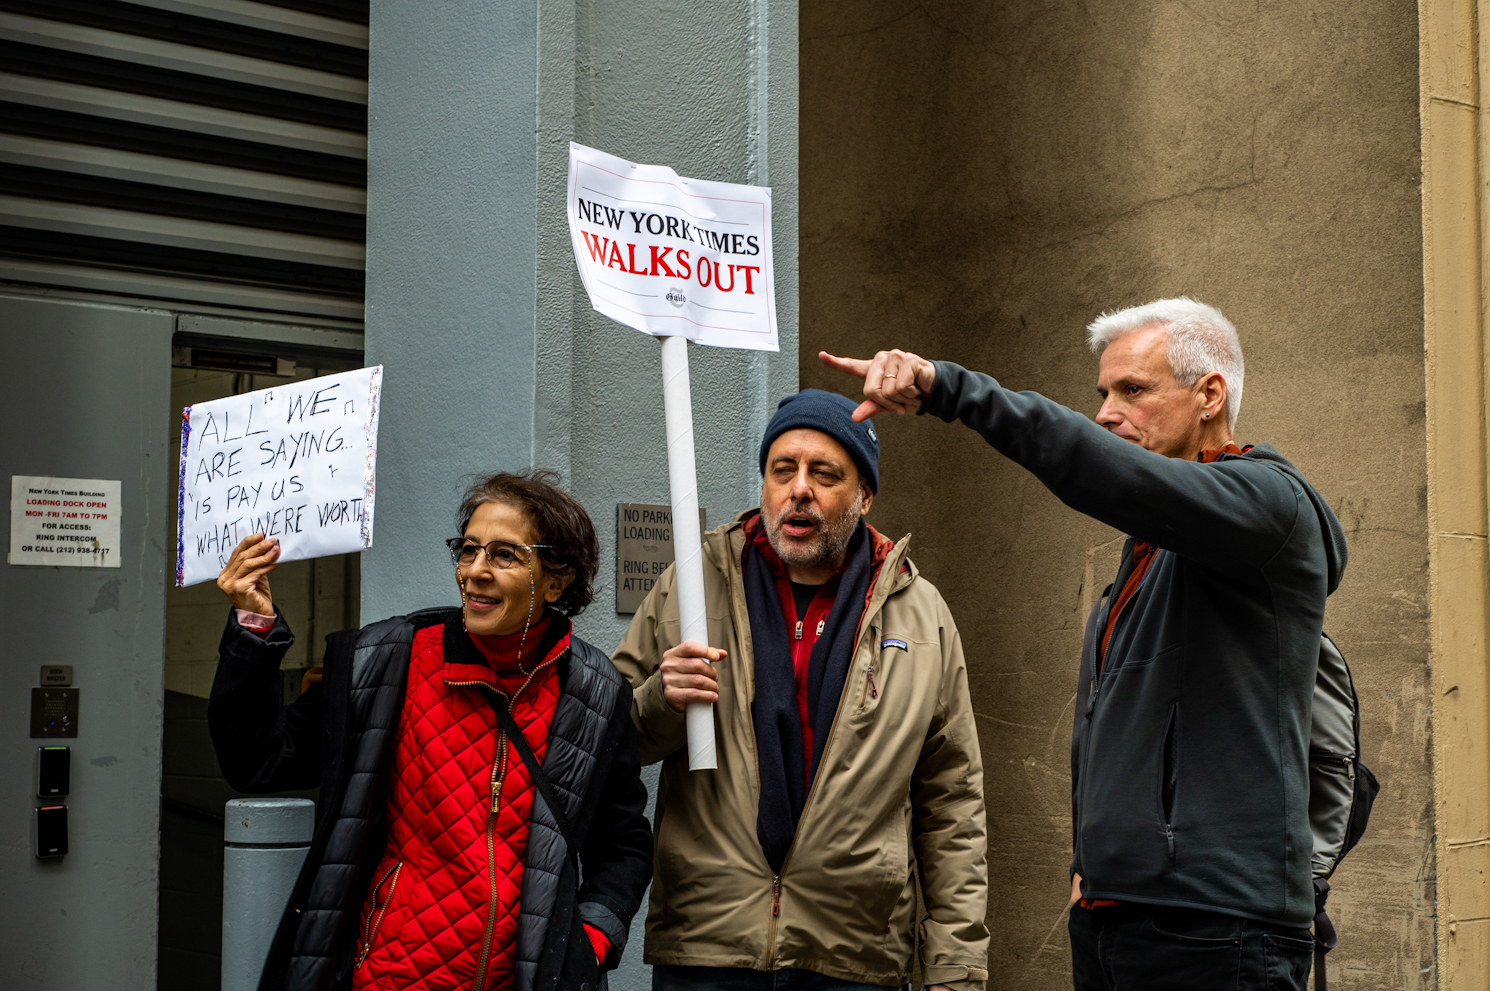 Two men and a woman standing outside of The New York Times building. A woman holds a sign that reads “All we are saying is pay us what we’re worth.” One man holds a sign that reads “New York Times Walks Out.” One man is pointing to the crowd.